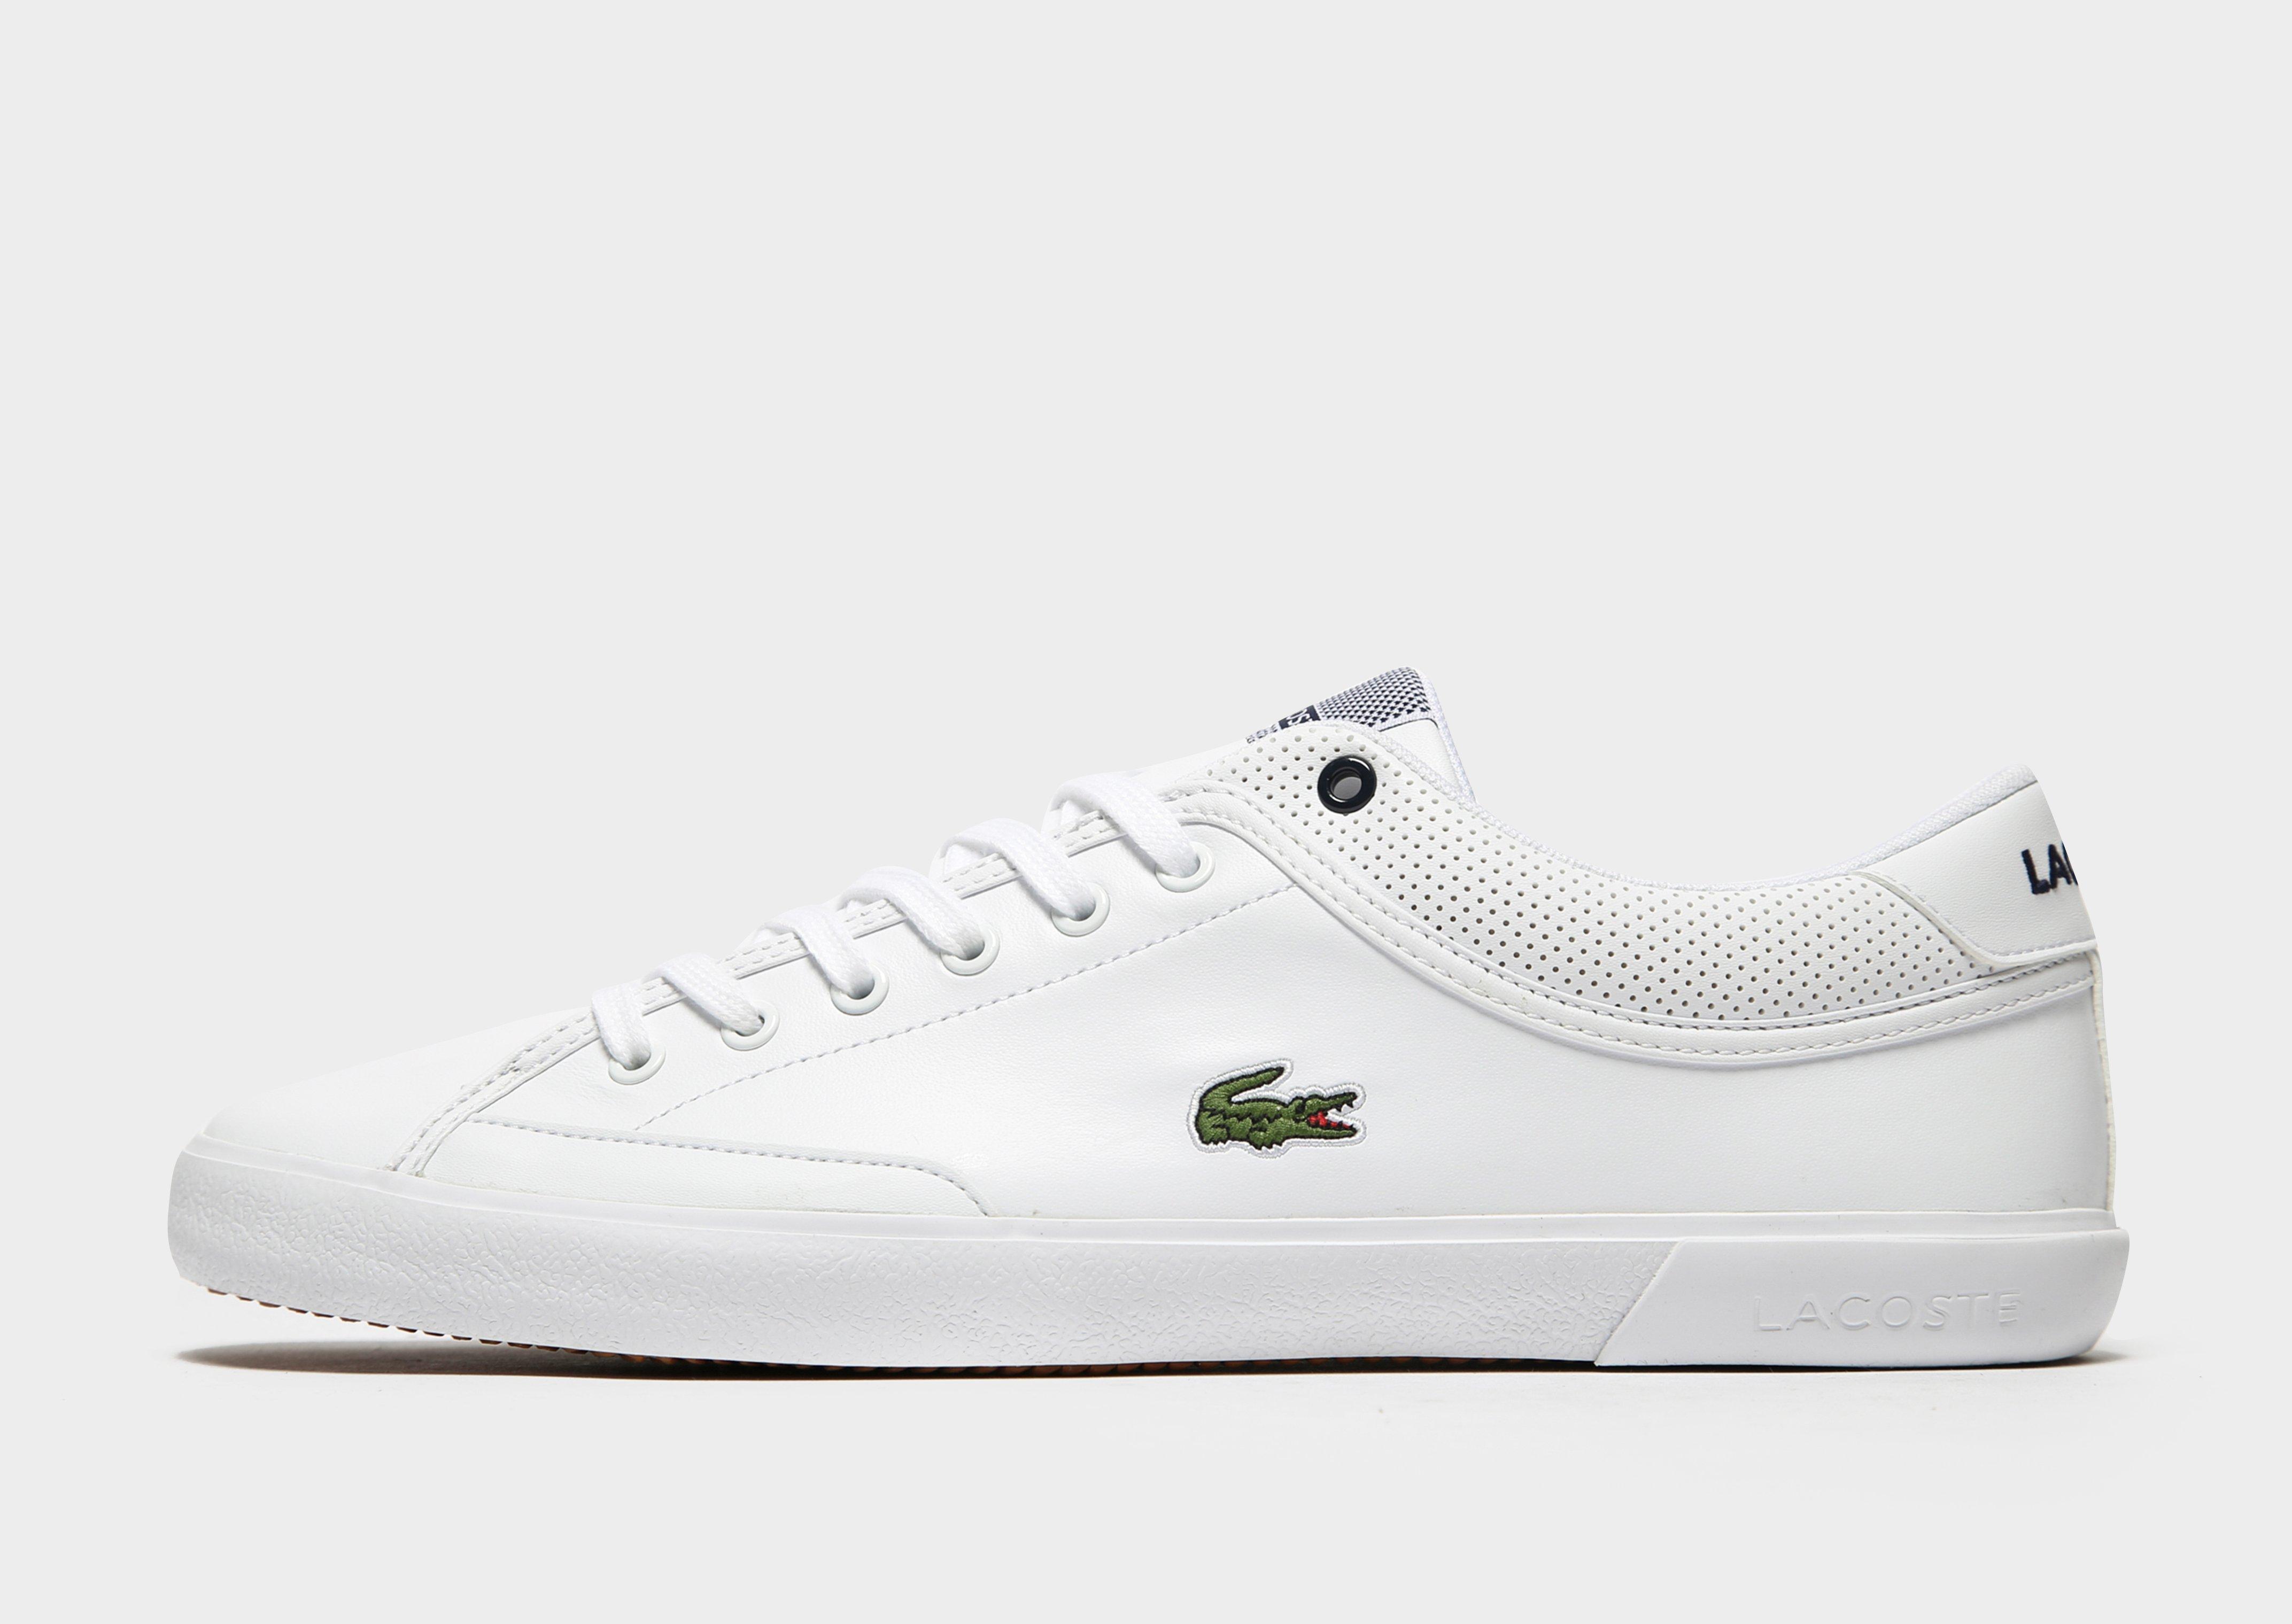 lacoste angha trainers